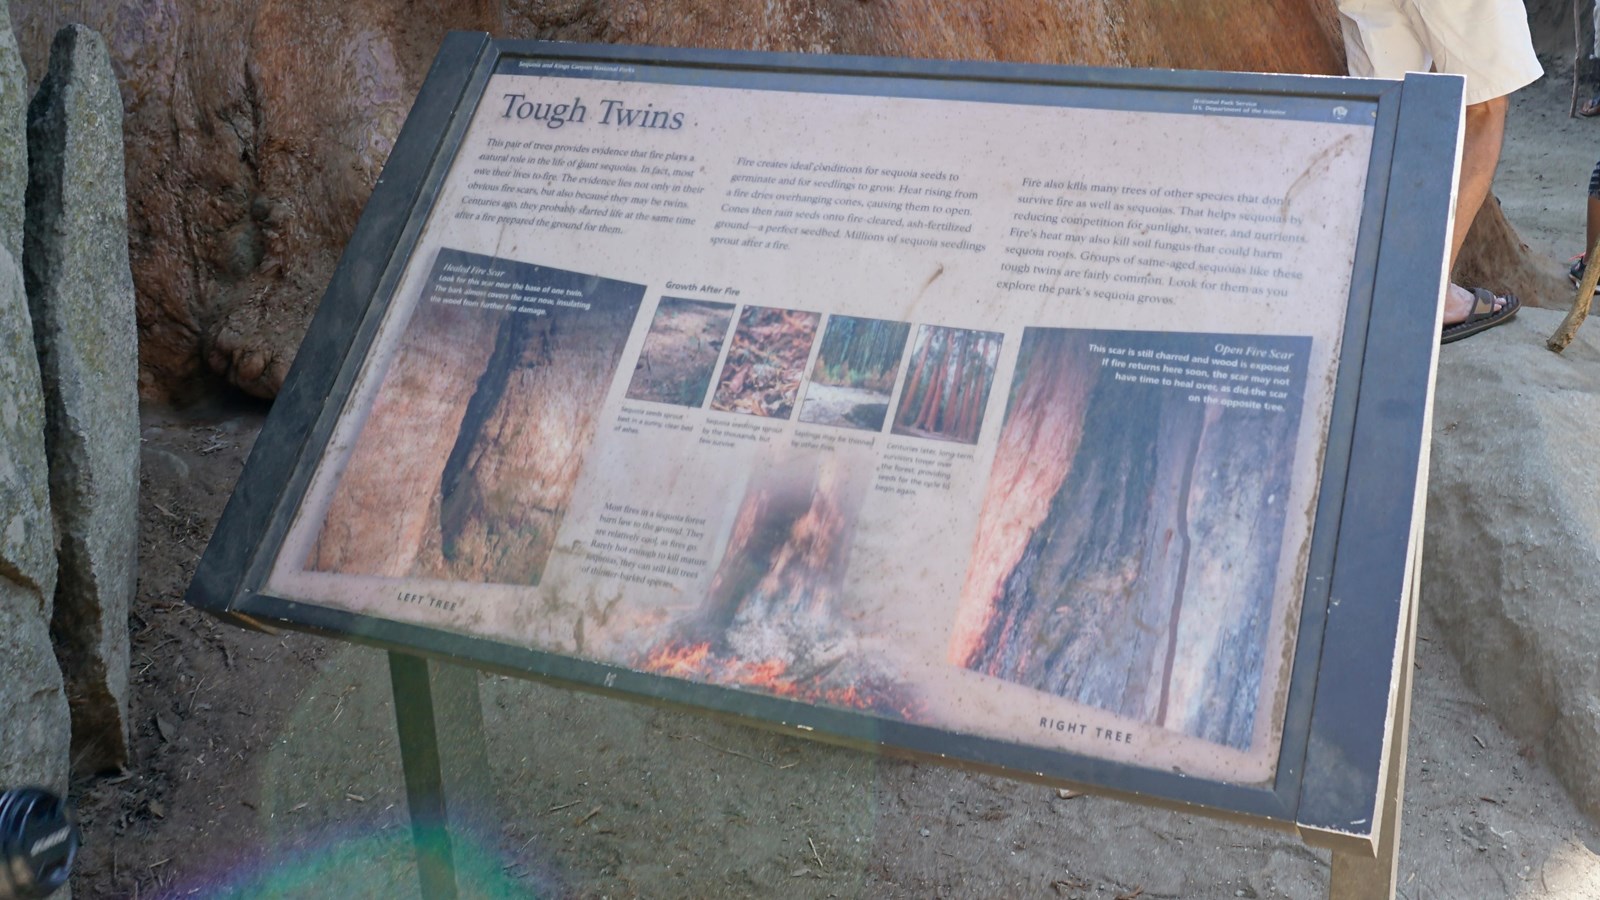 A metal panel sits in a metal frame. On the panel are images and text 